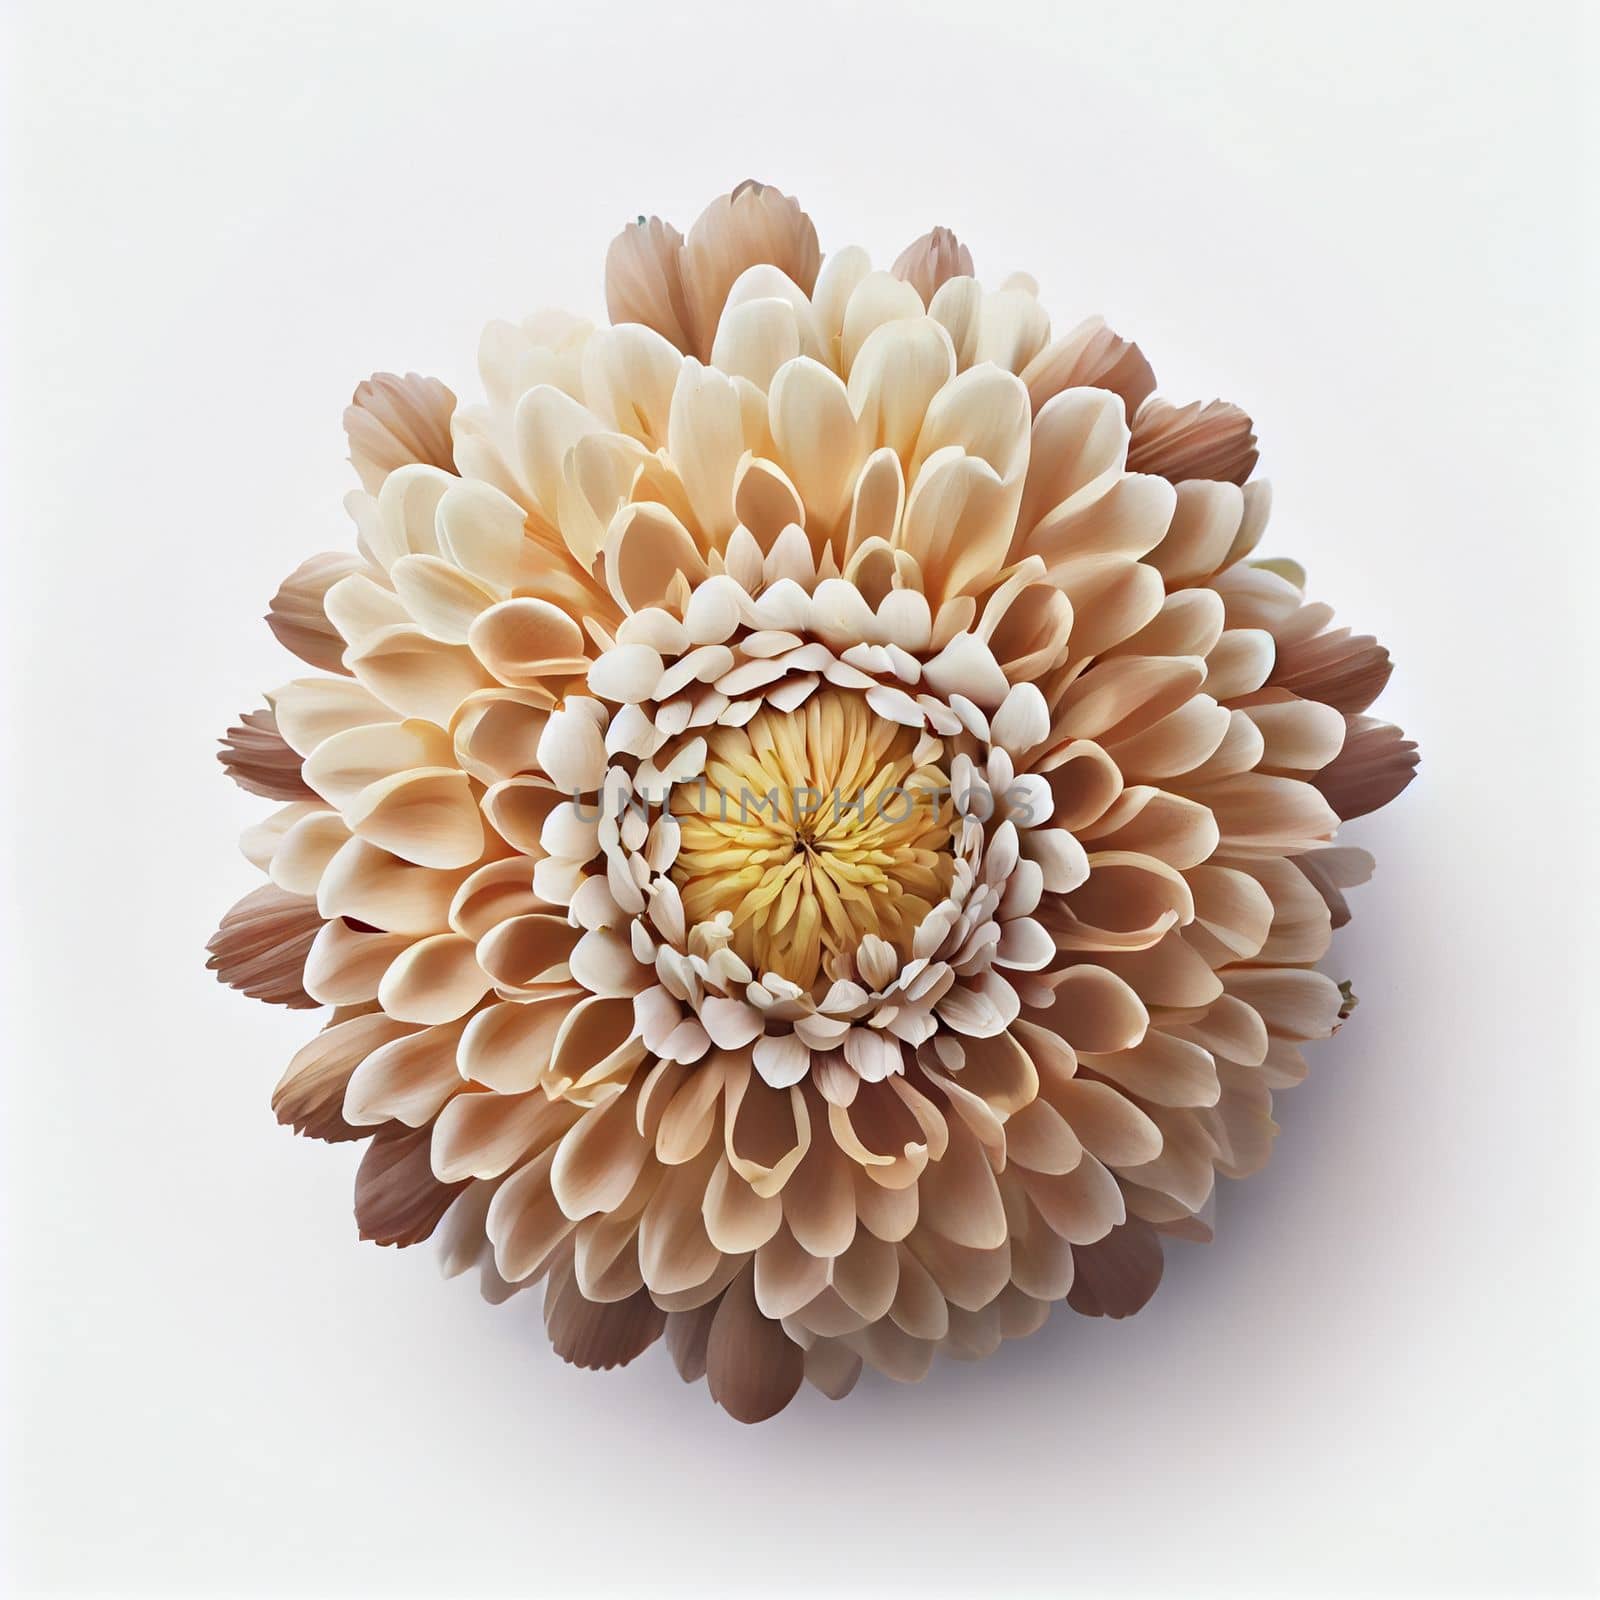 Top view of Chrysanthemums flower on a white background, perfect for representing the theme of Valentine's Day.